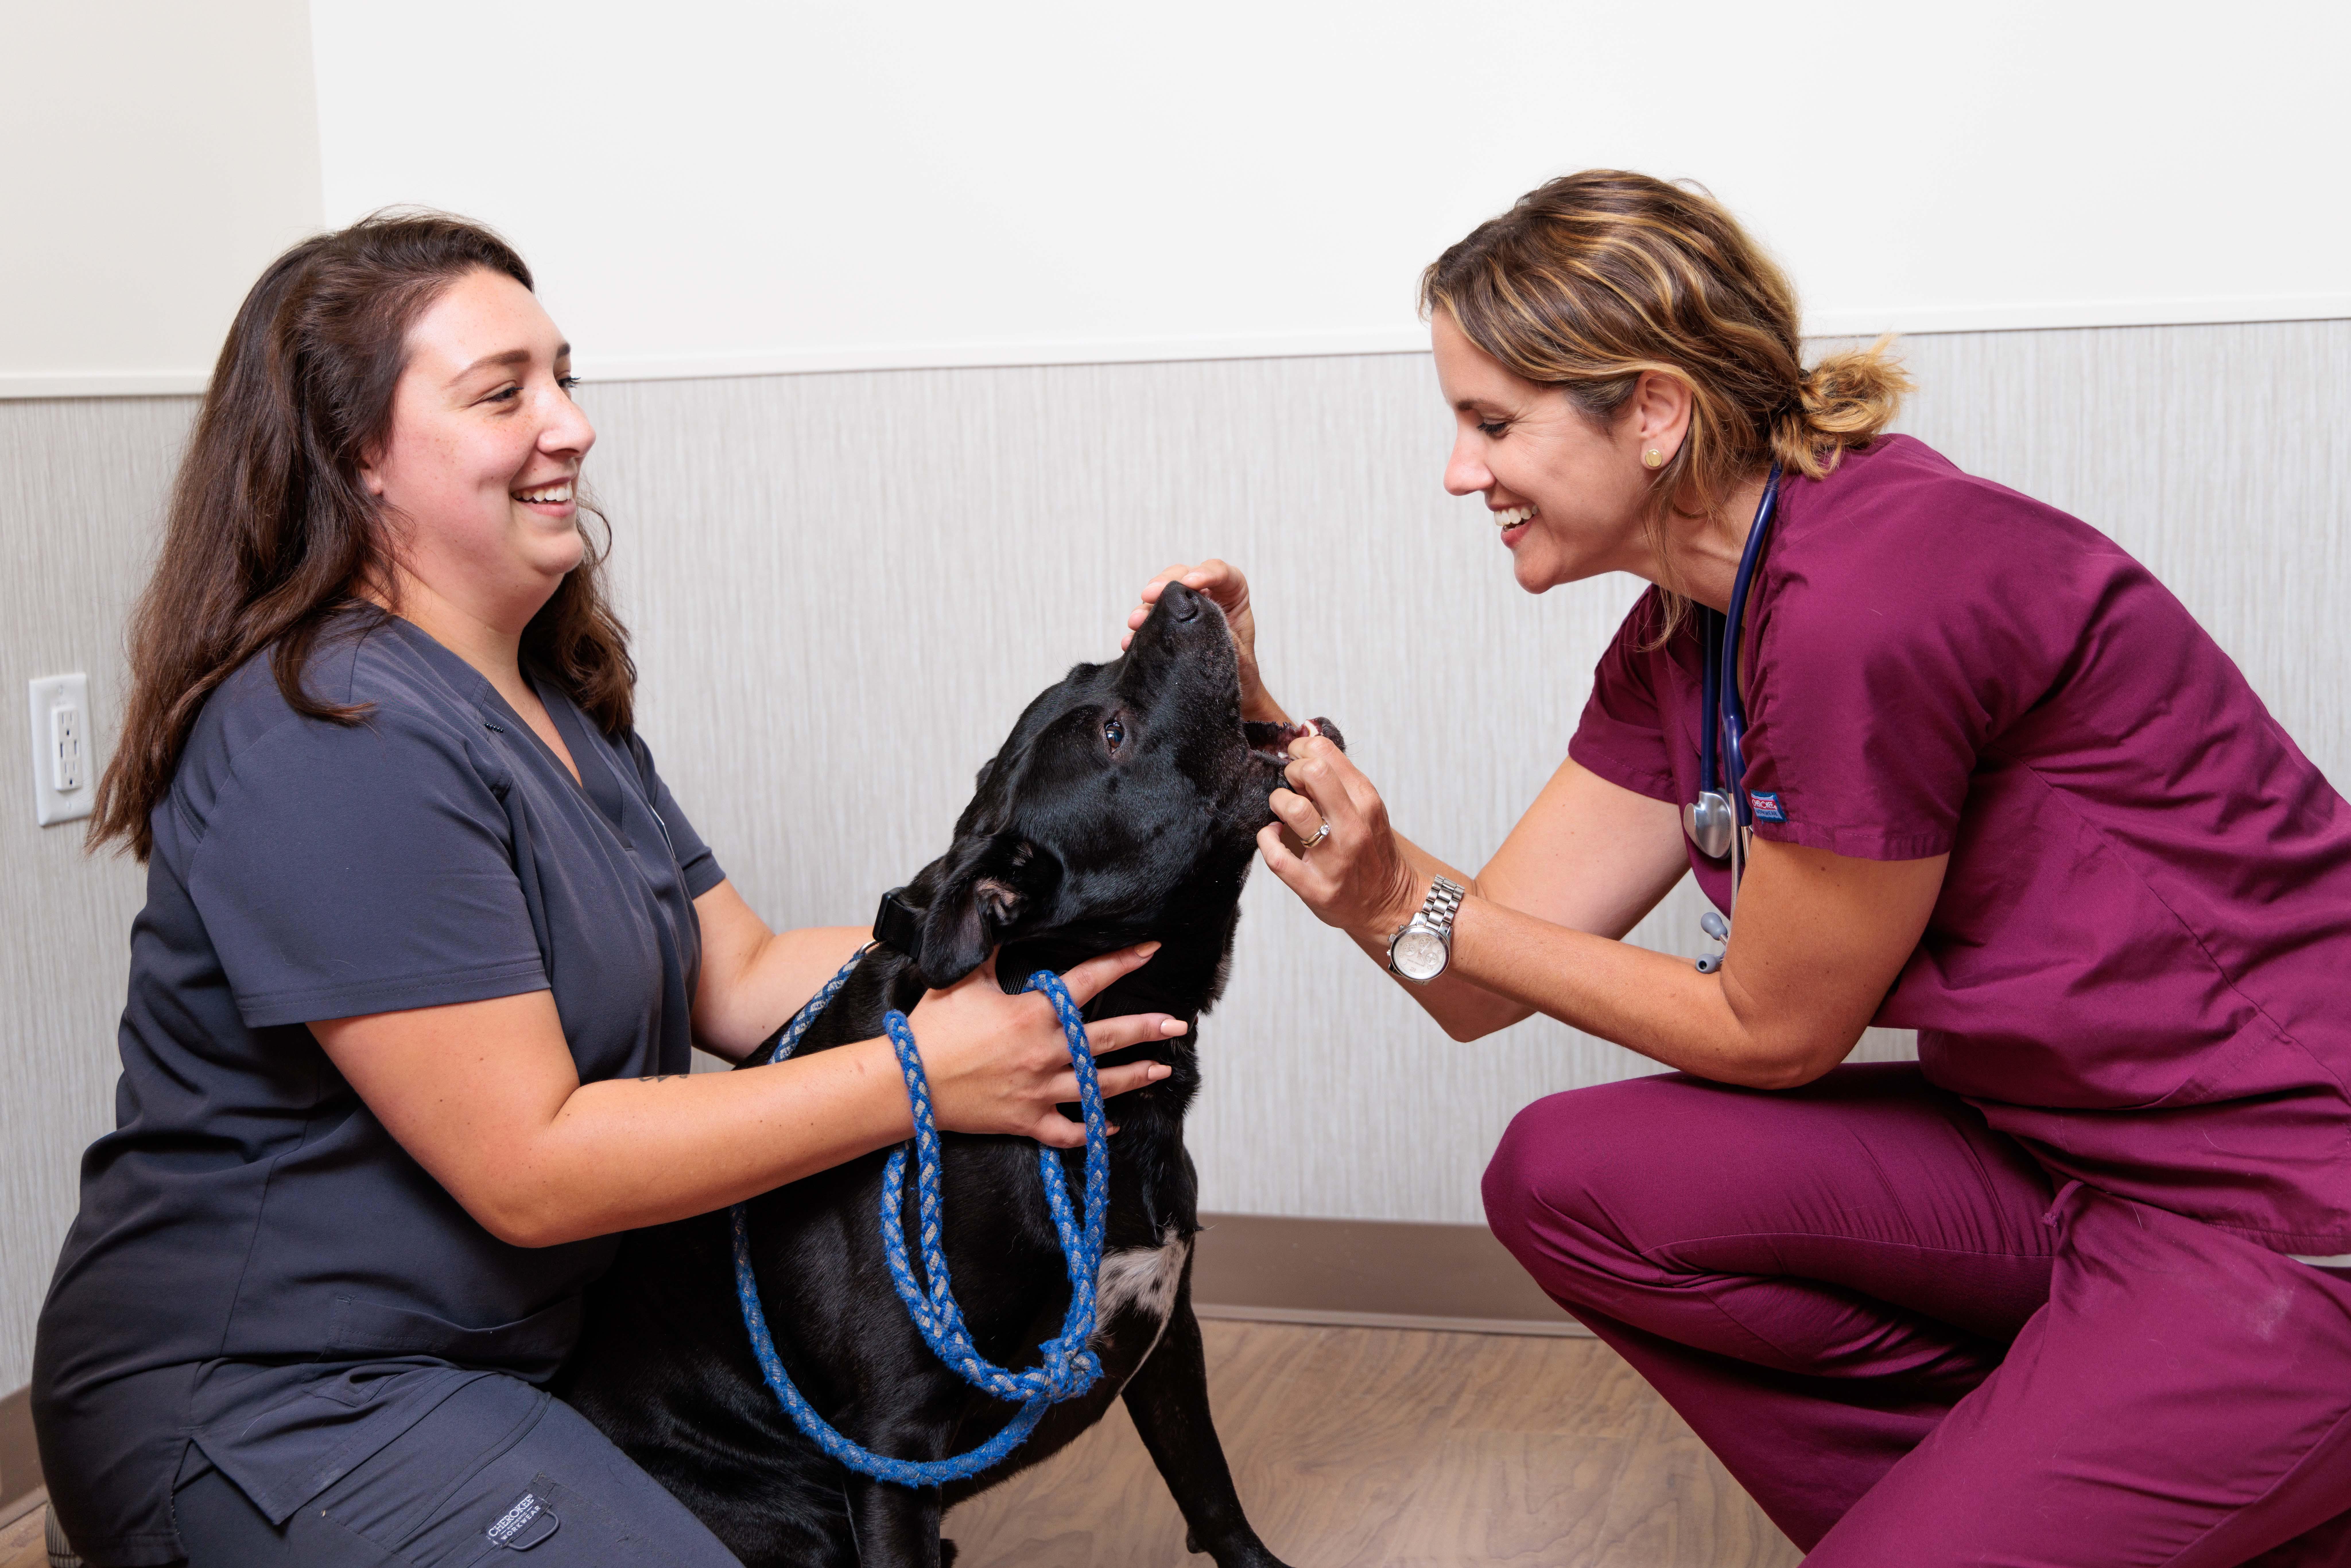 Part of our patients annual visit includes and dental exam.  Dr. Laura Mills checks for dental disease, which is about more than doggy breath, but about your pet’s complete health! Oral bacteria puts pets at risk for painful teeth and gums, and more serious issues like organ damage.